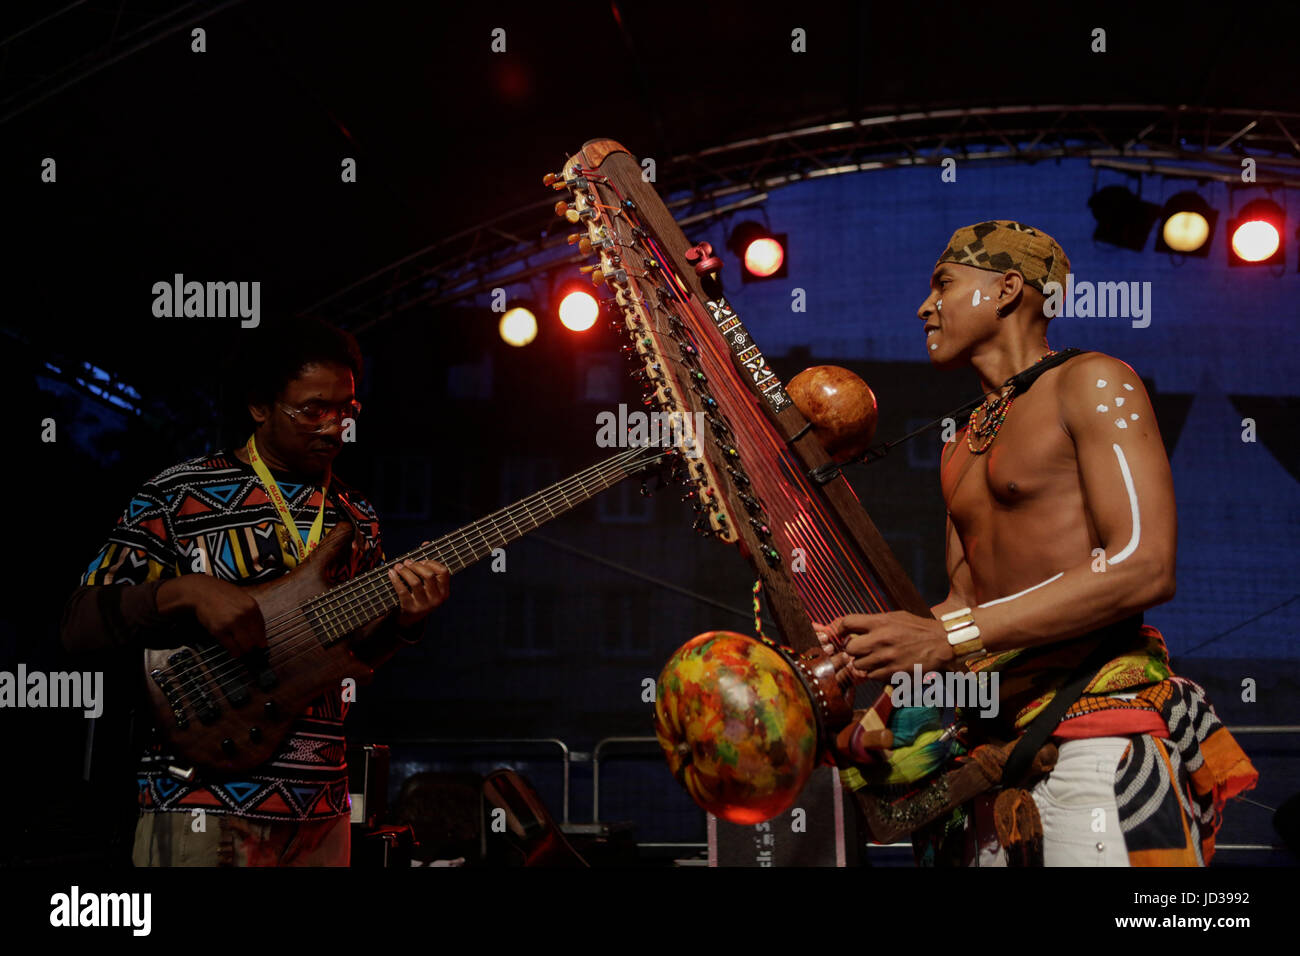 Worms, Germany. 17th June, 2017. Liva and HAJAmadagascar from HAJAmadagascar & The Groovy People perform live on stage at the 2017 Jazz and Joy Festival in Worms in Germany. Credit: Michael Debets/Pacific Press/Alamy Live News Stock Photo